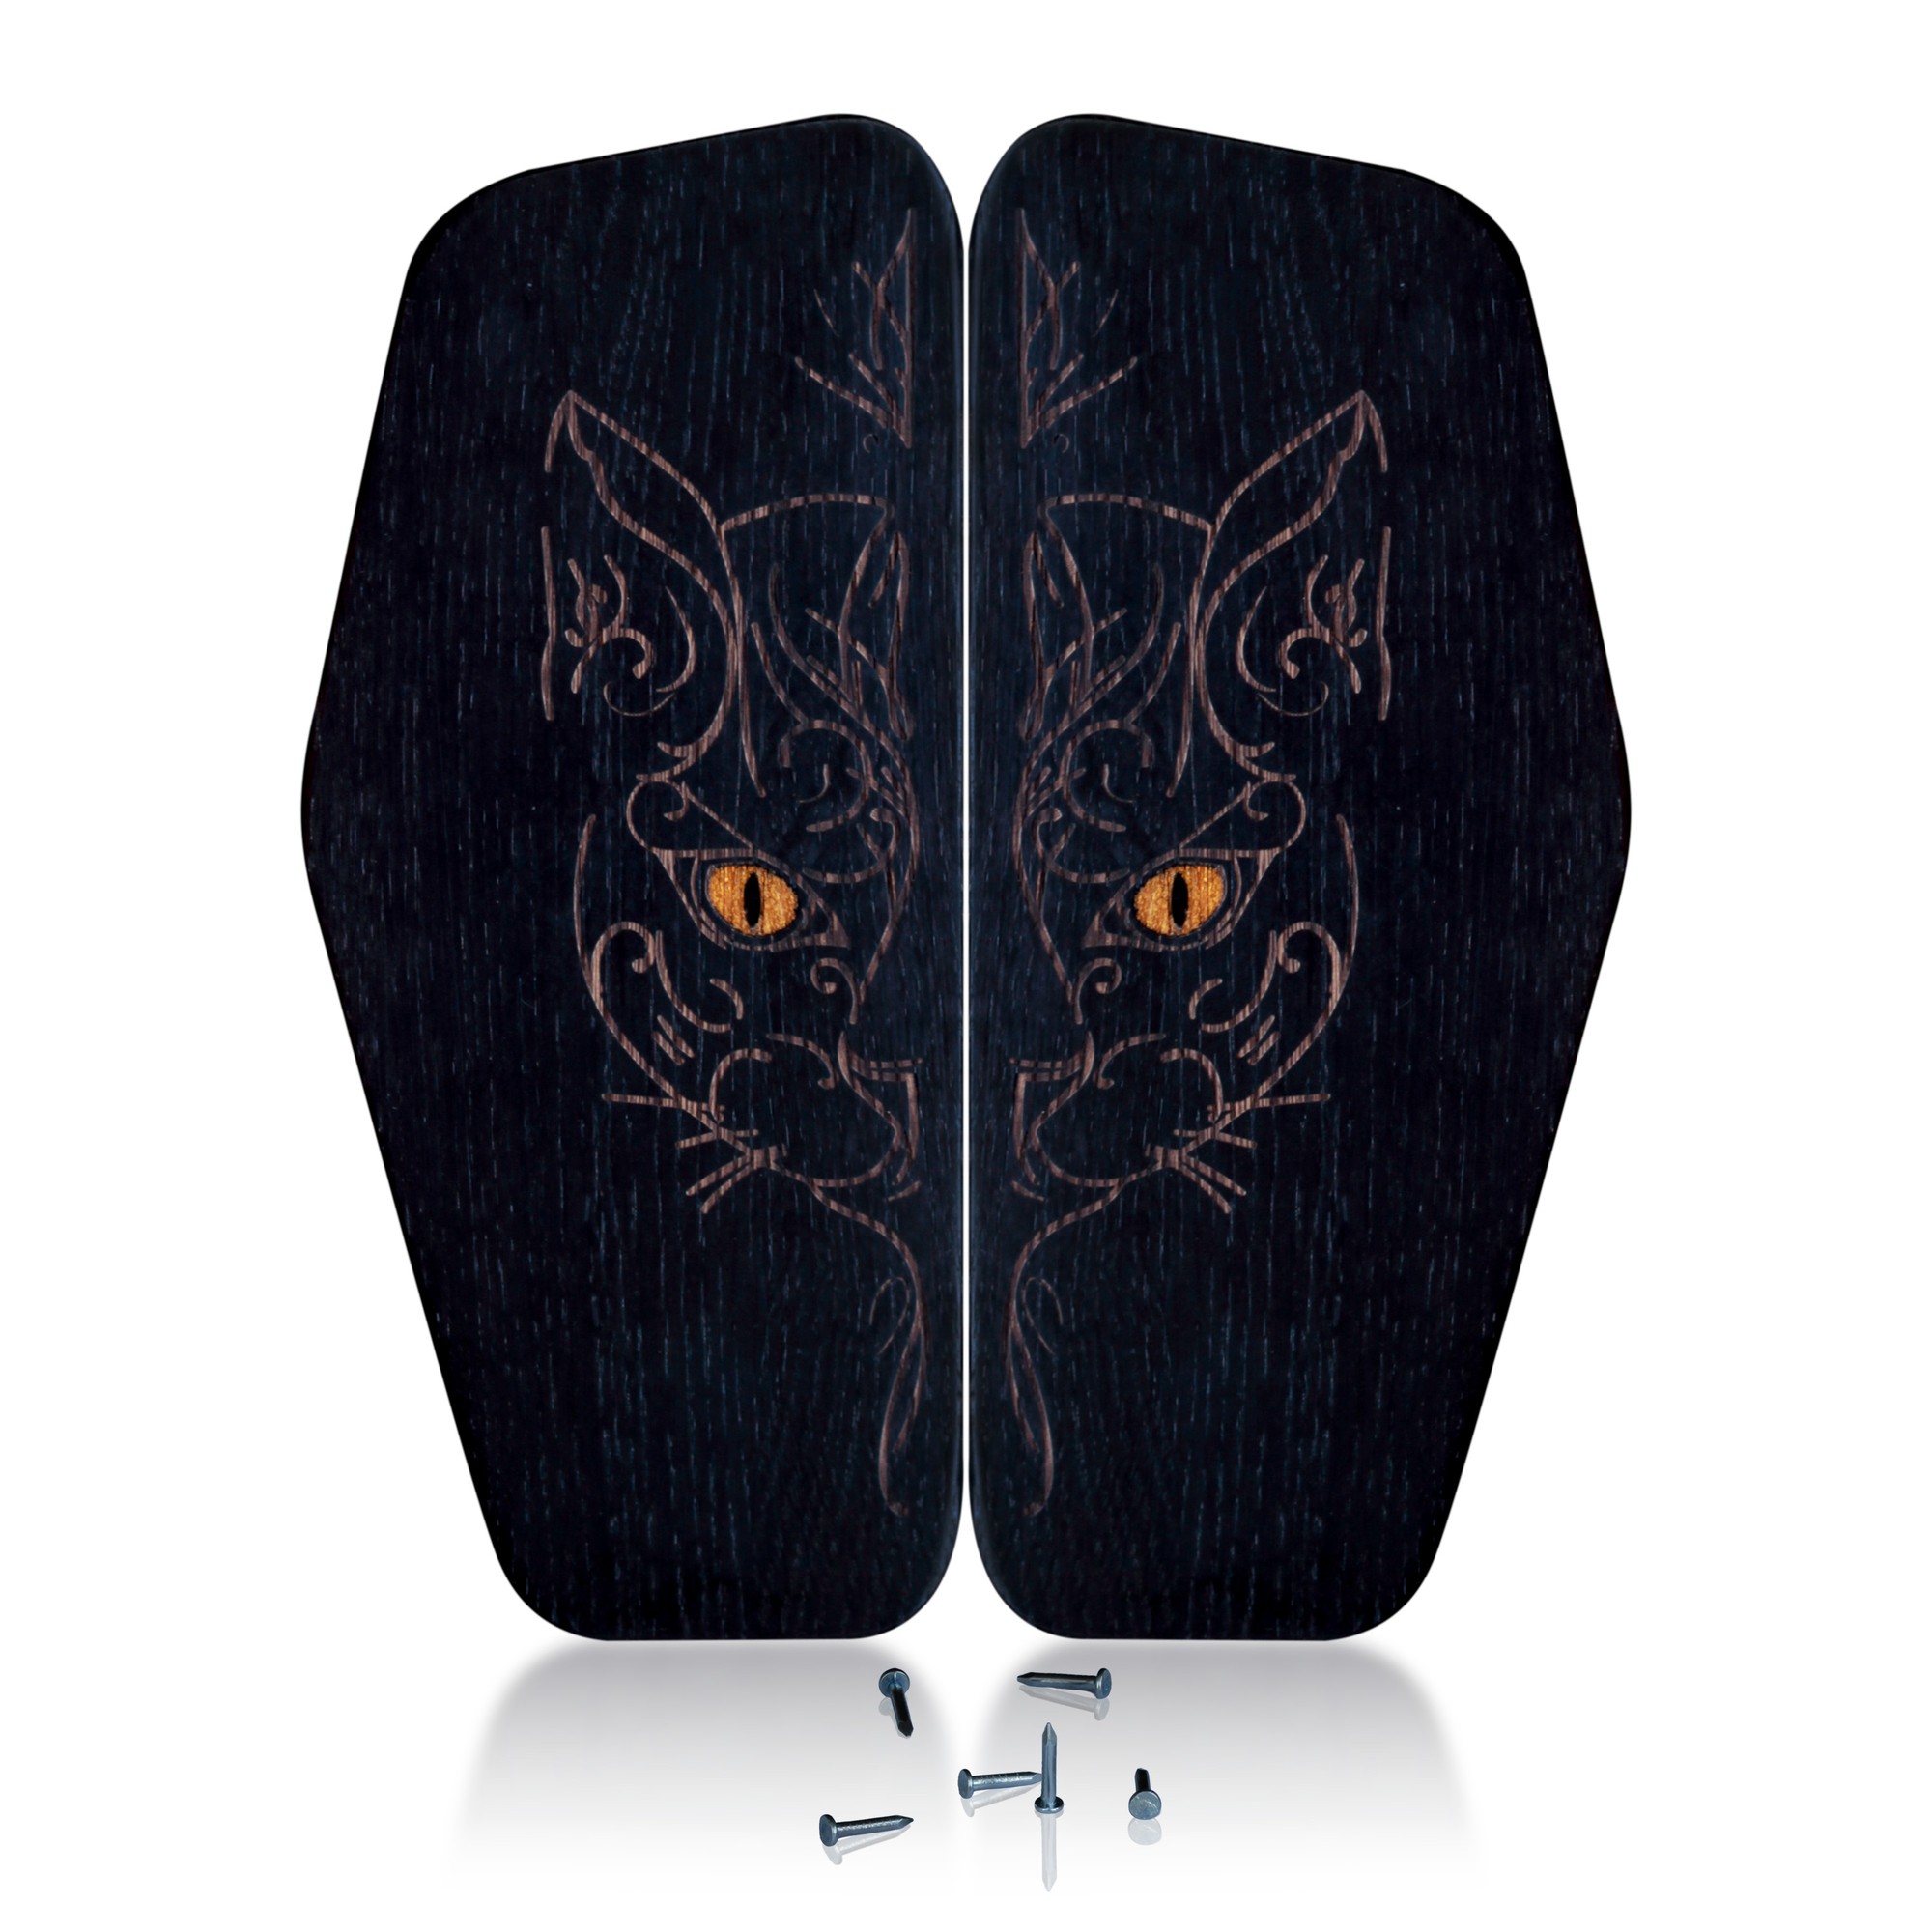 Oh! SADHU Board for Yoga from Natural Oak, Black Cat with Realistic Eyes